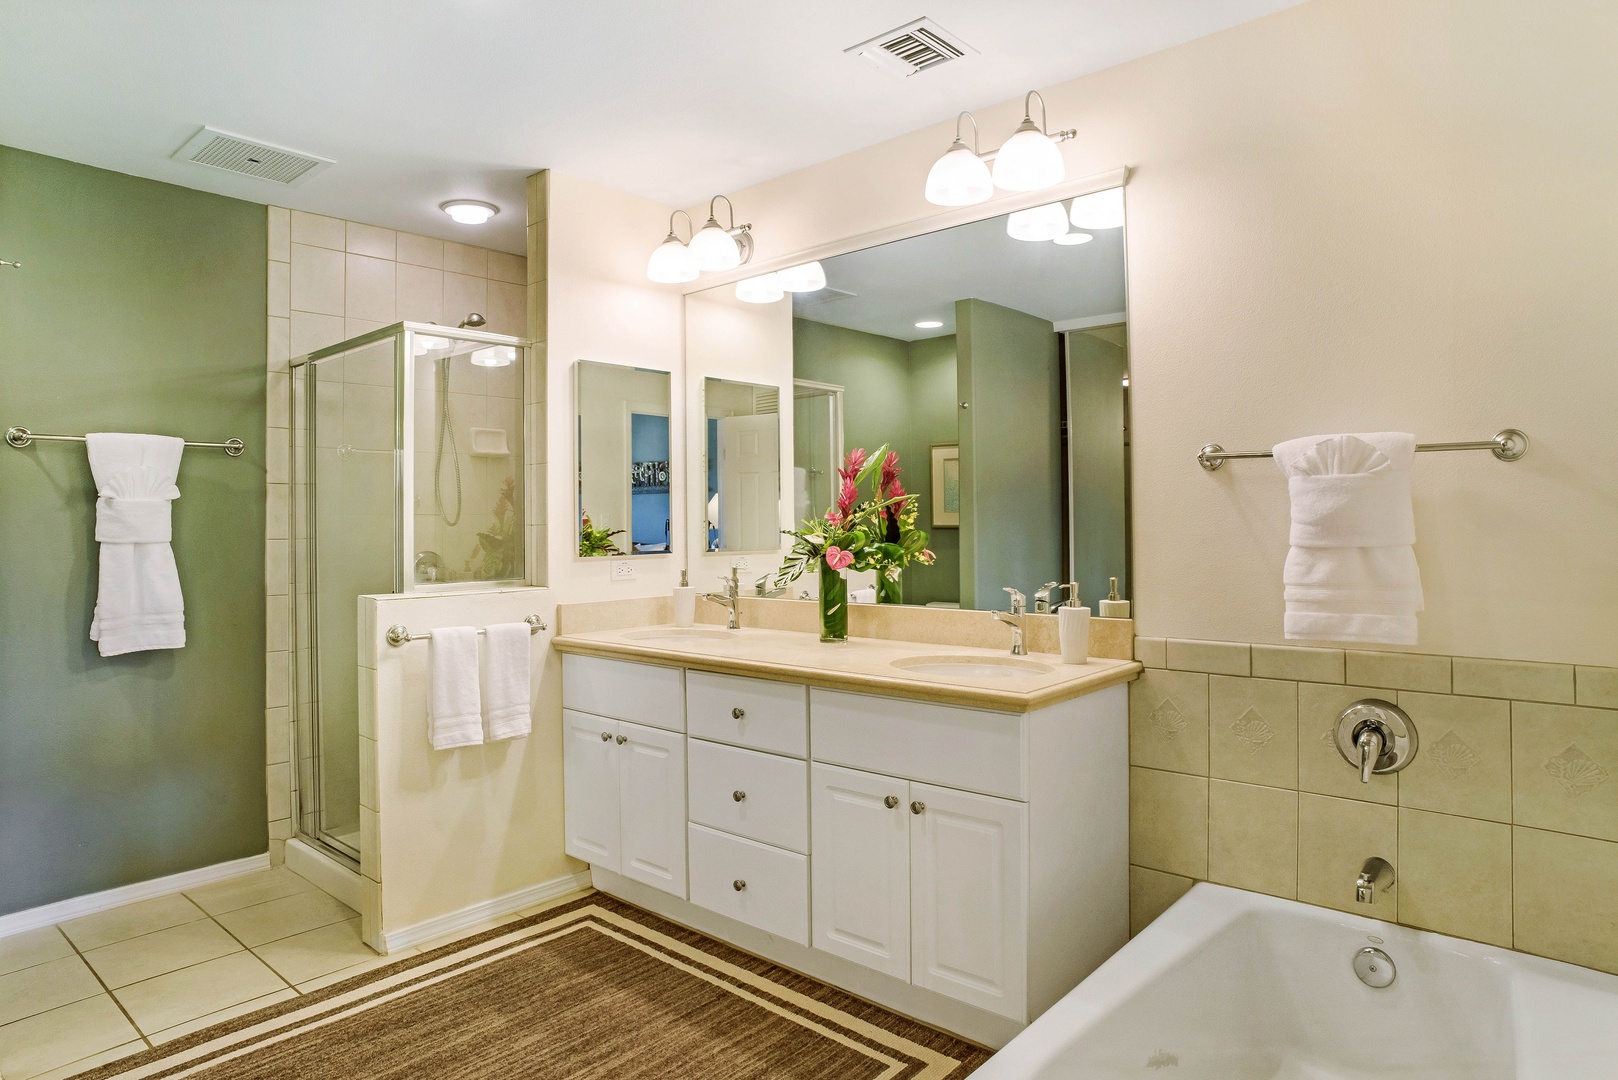 Waikoloa Vacation Rentals, Waikoloa Colony Villas 403 - Spacious Ensuite Primary Bath w/ Dual Sinks, Large Soaking Tub and Glass Enclosed Shower